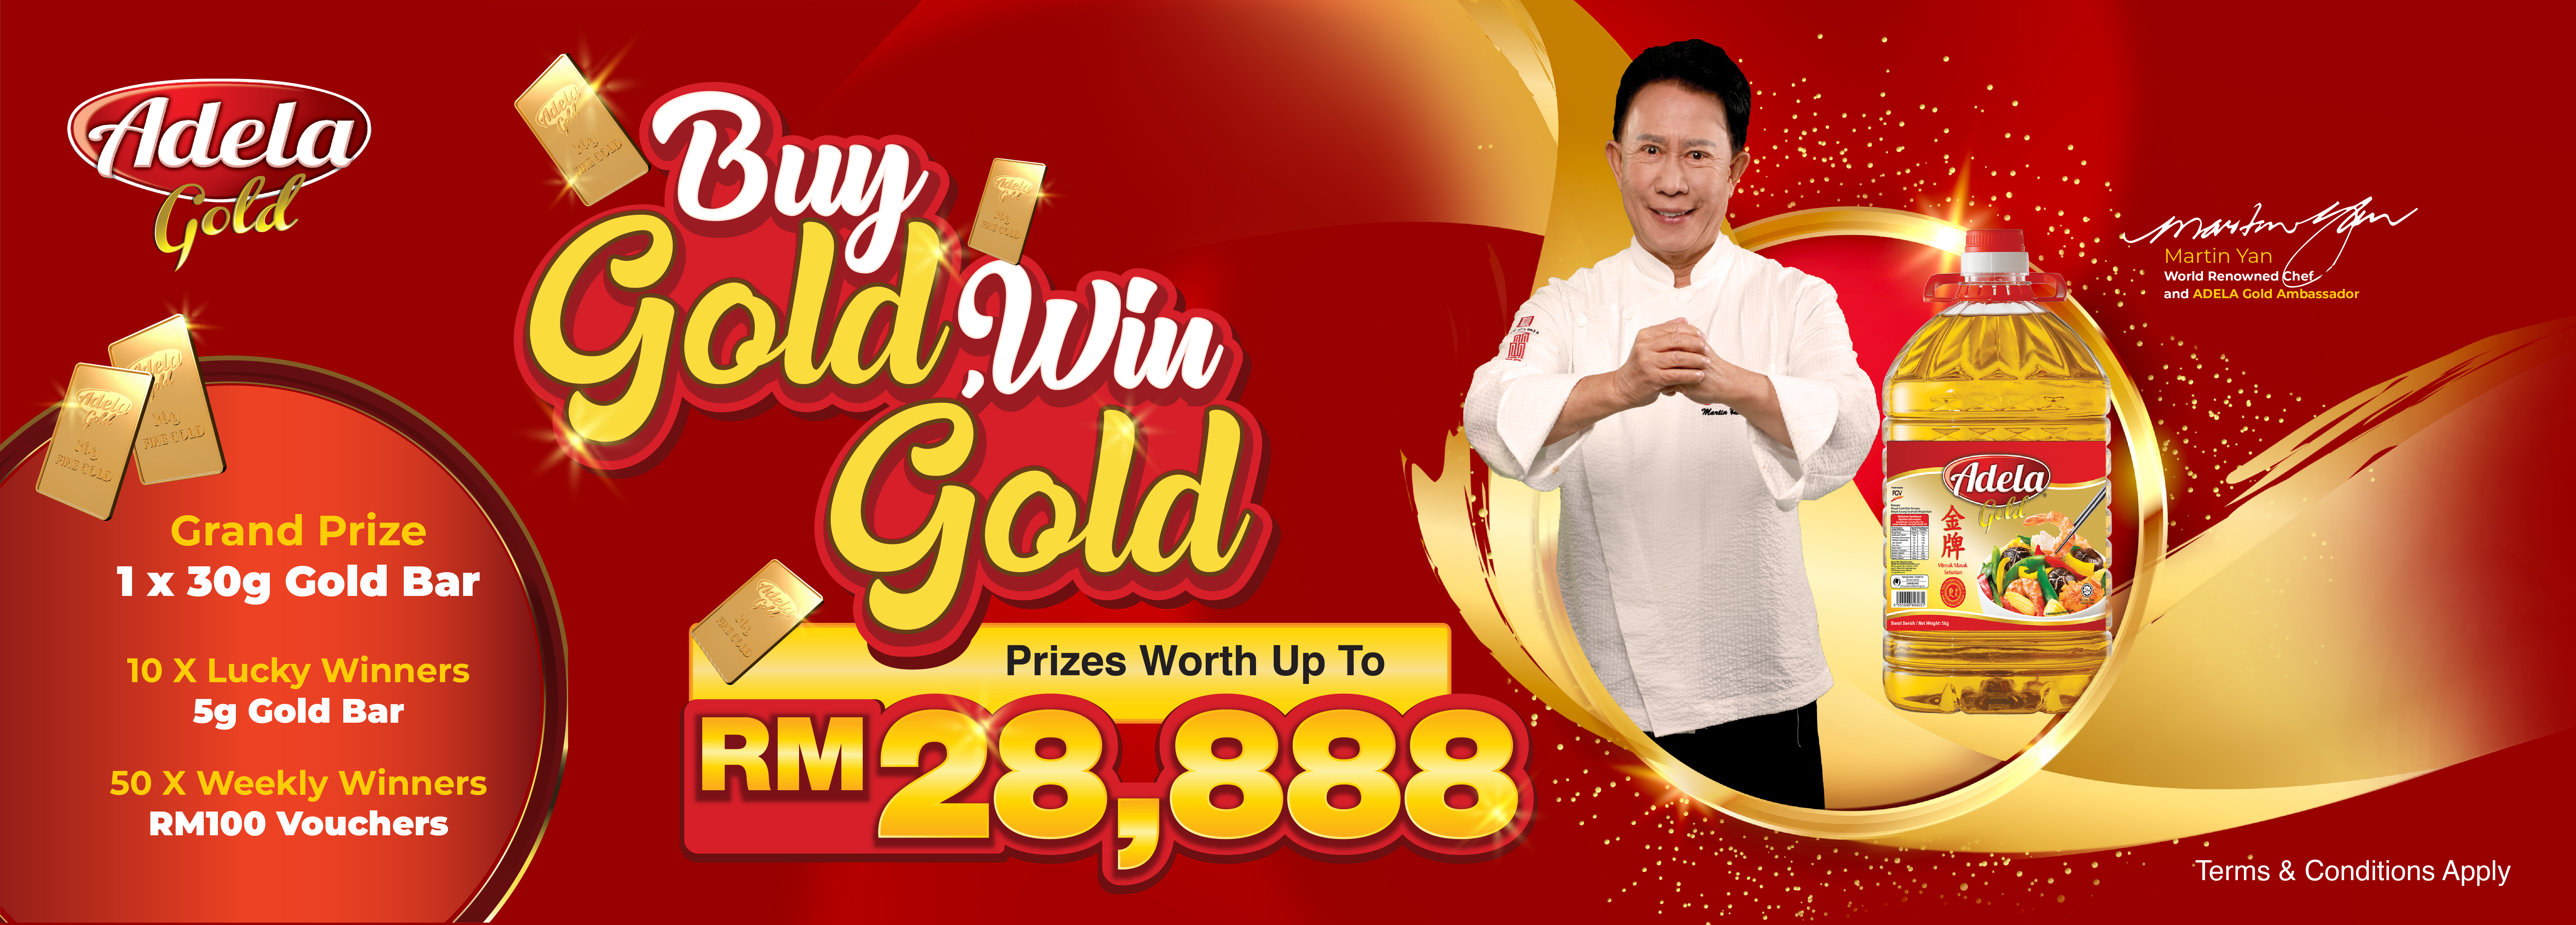 “Buy GOLD Win GOLD”